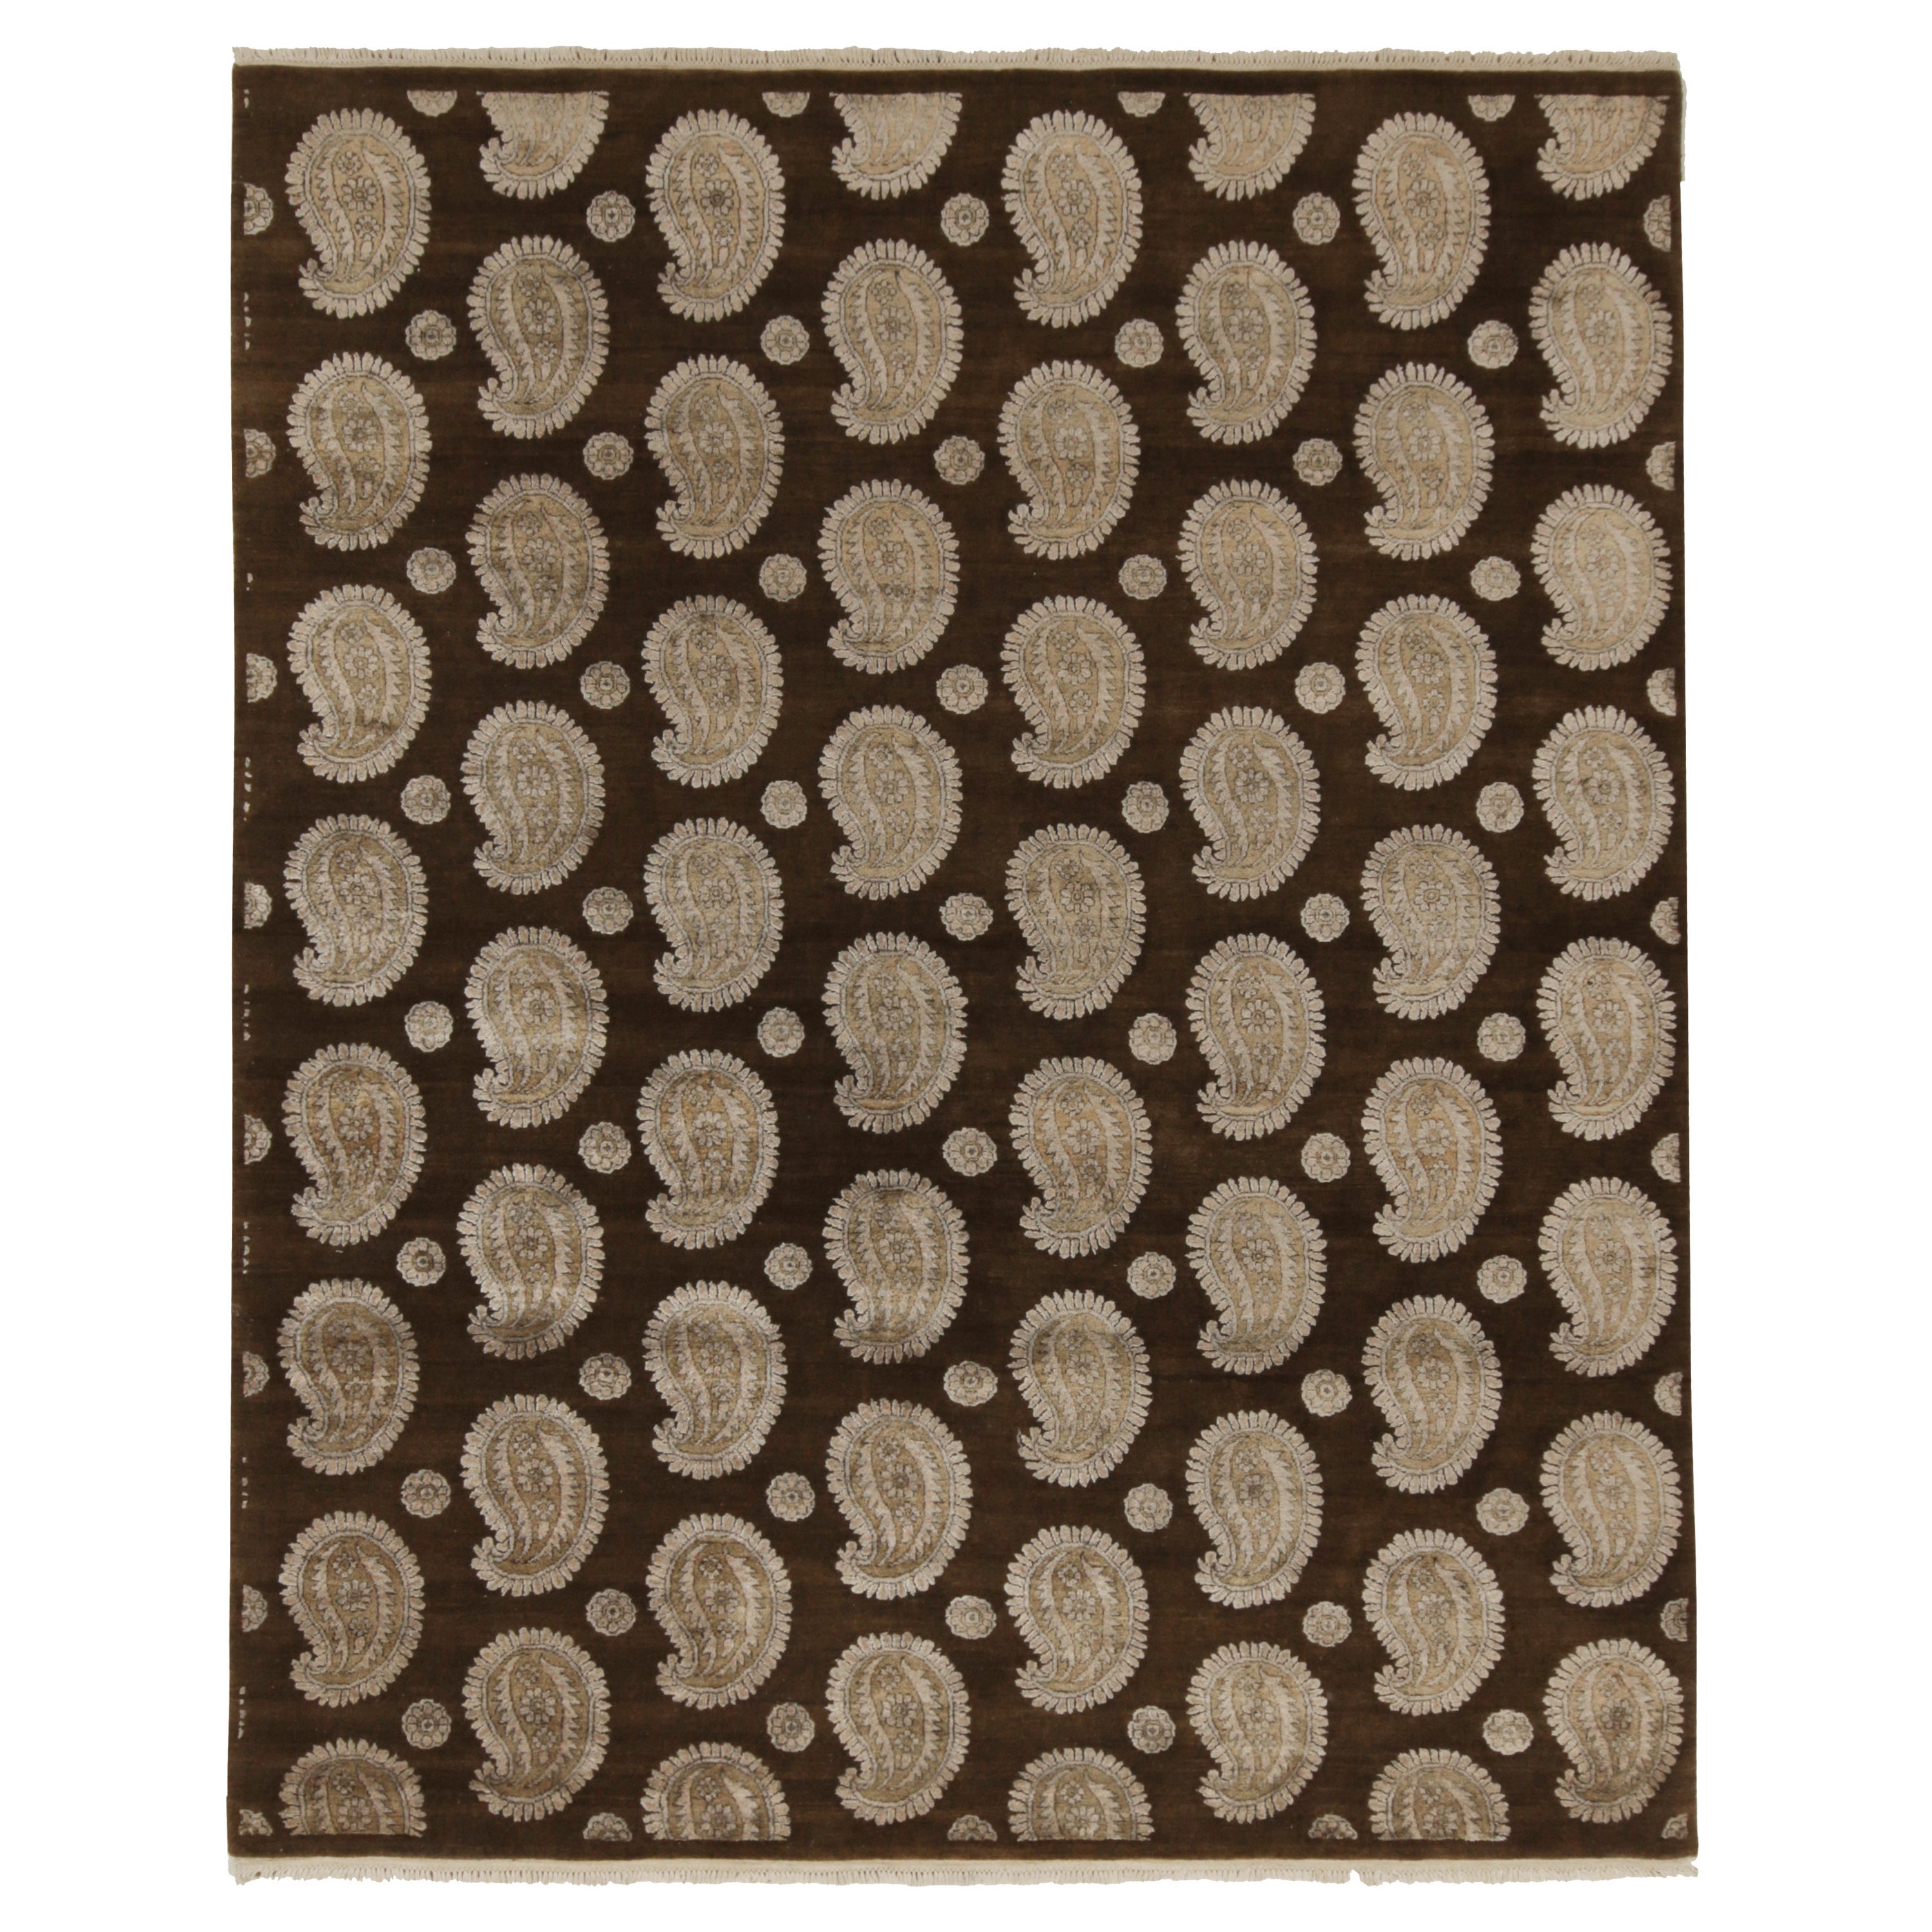 Rug & Kilim’s Classic Style Rug in Brown with Ivory Paisley Patterns